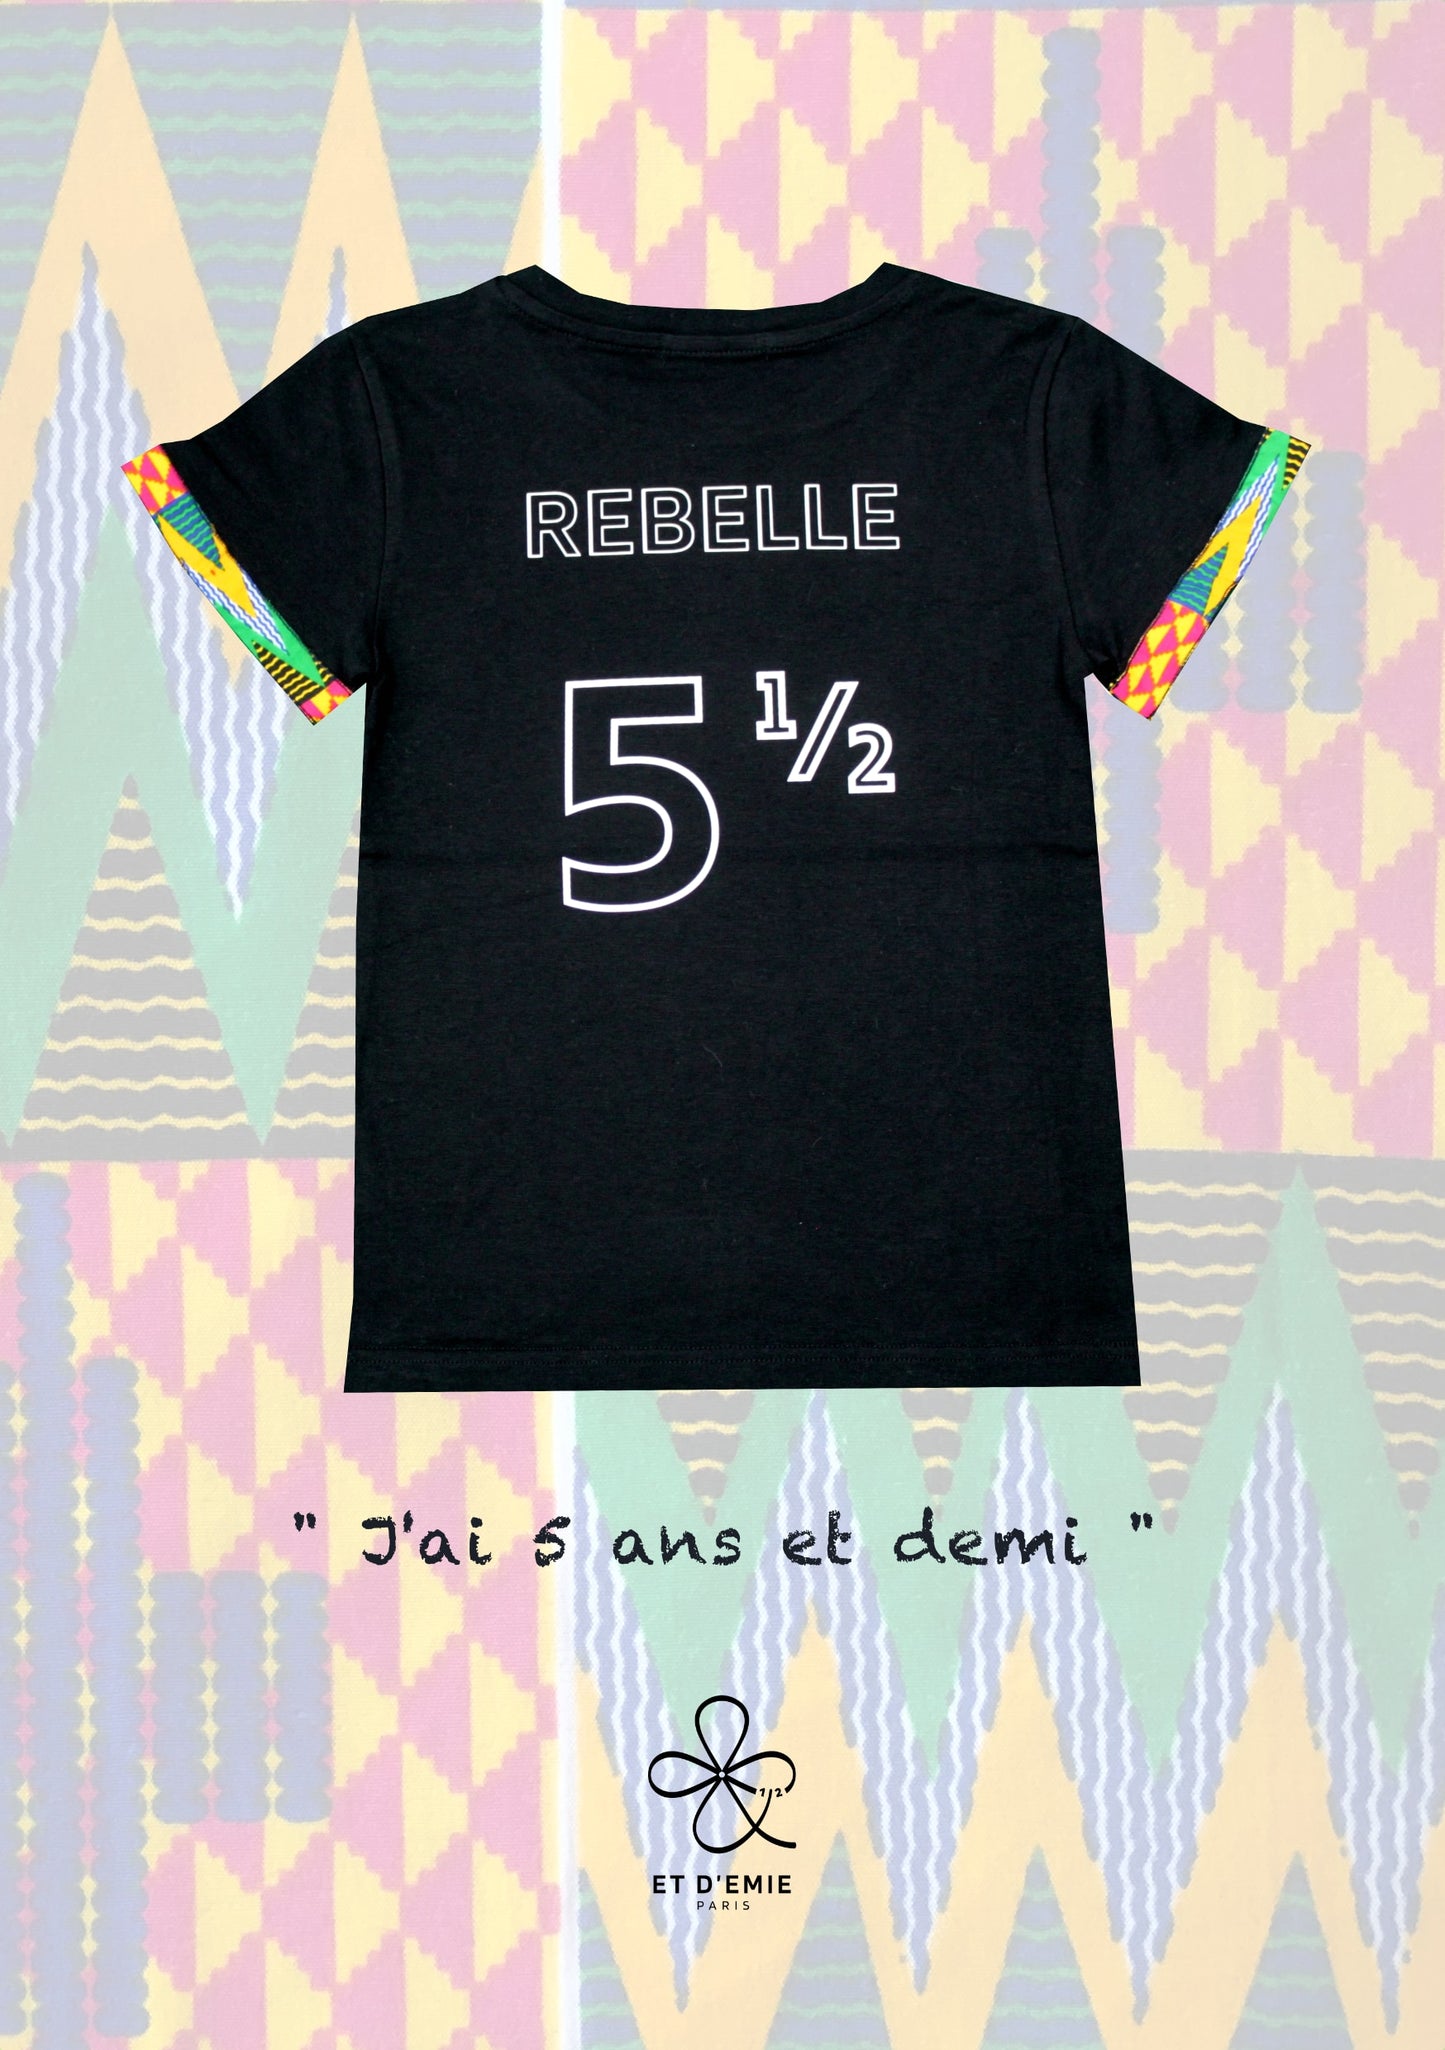 REBELLE t-shirt "I'm 5 and a half years old" embroidered in organic cotton and wax 🇫🇷